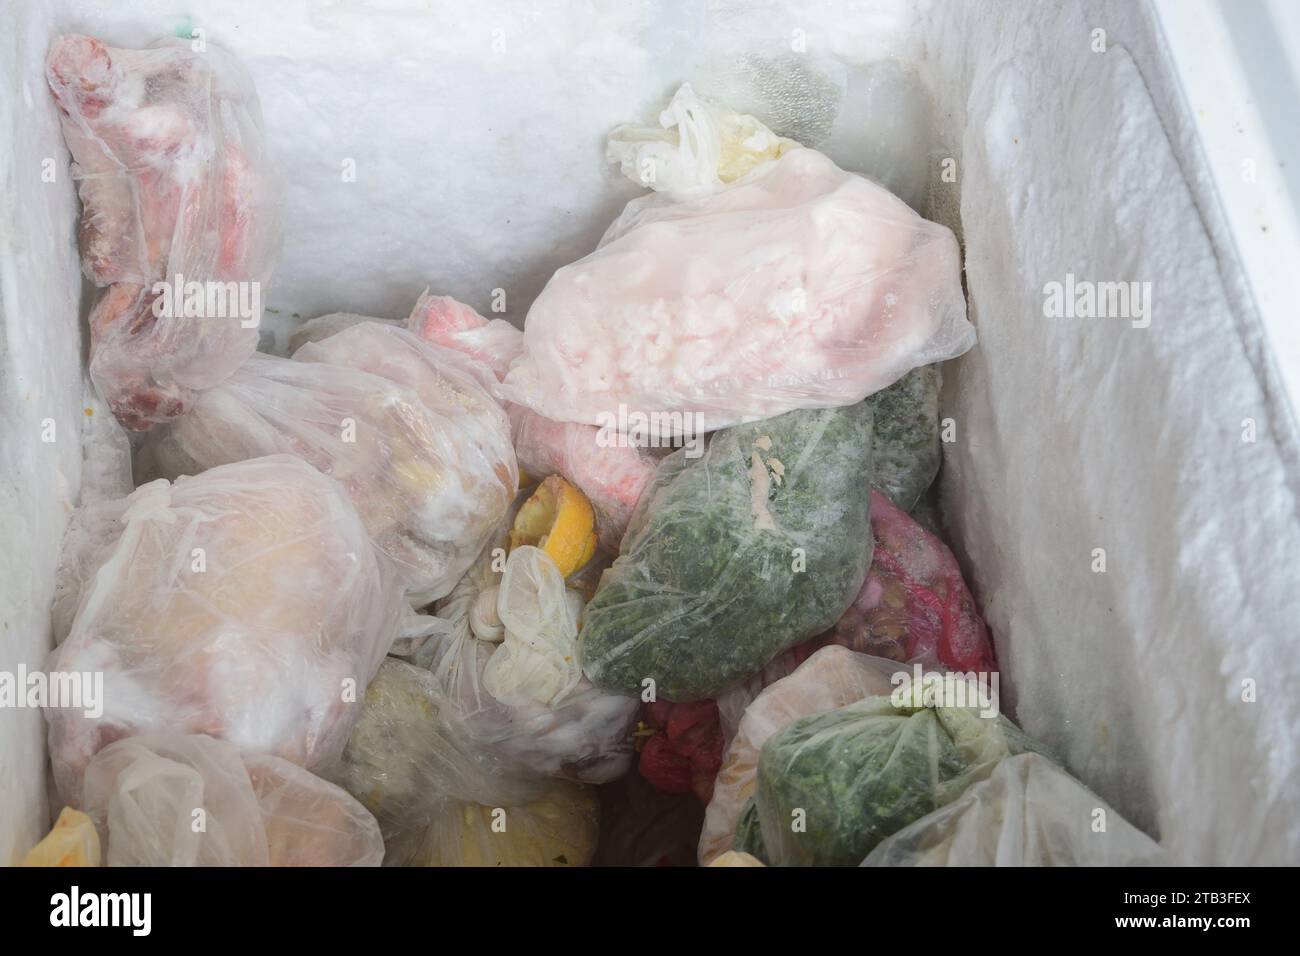 stack of food conserved in bad condition in freezer. harmful food for helth Stock Photo